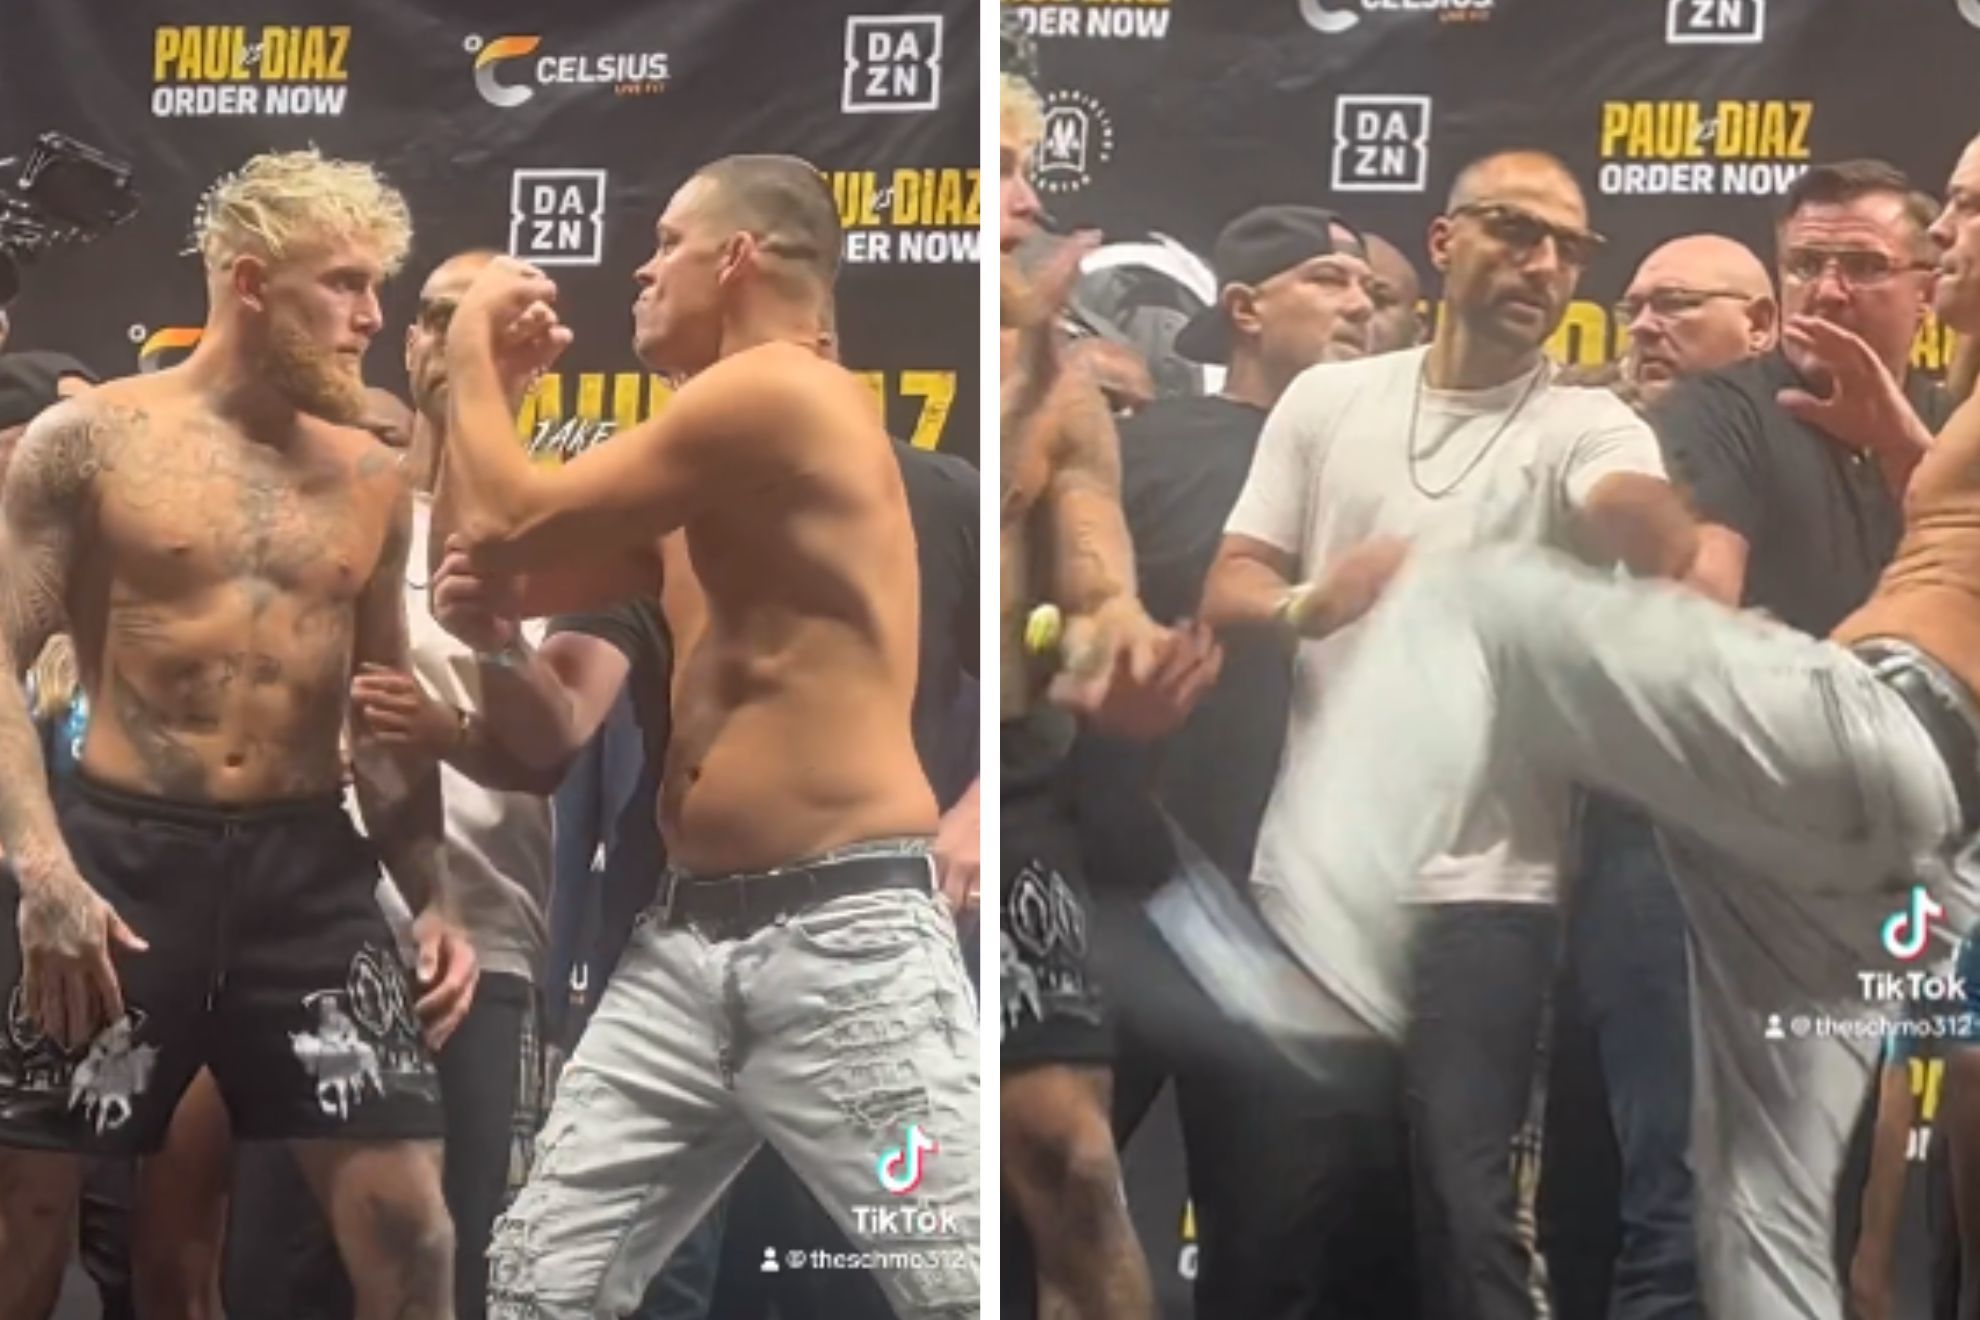 Nate Diaz attempts to kick Jake Paul as they goad each other in final faceoff